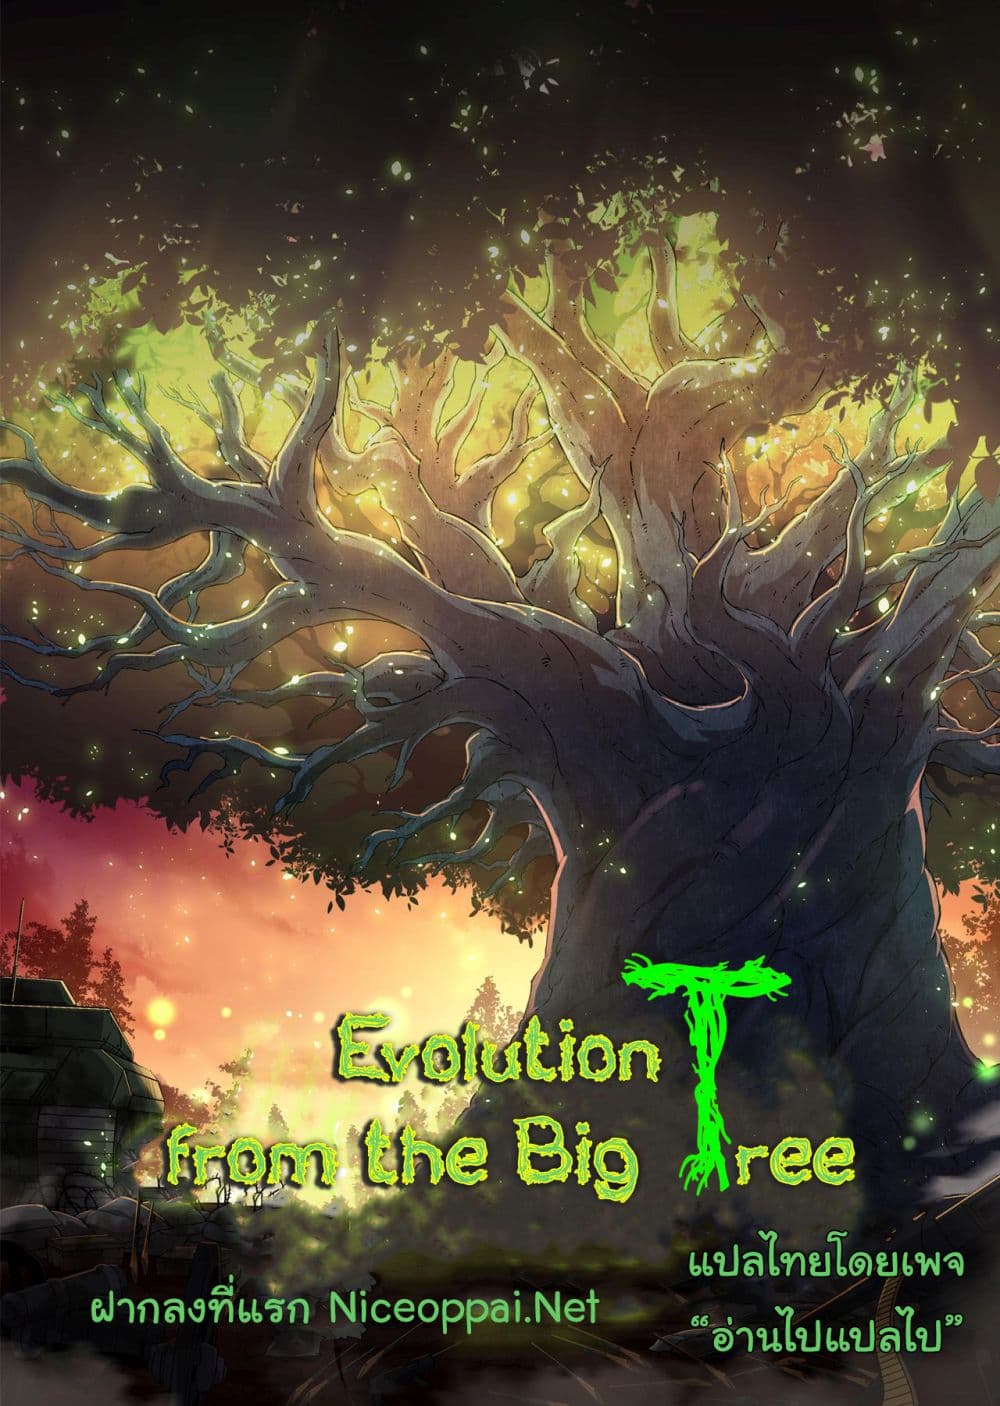 Evolution from the Big Tree 23 01